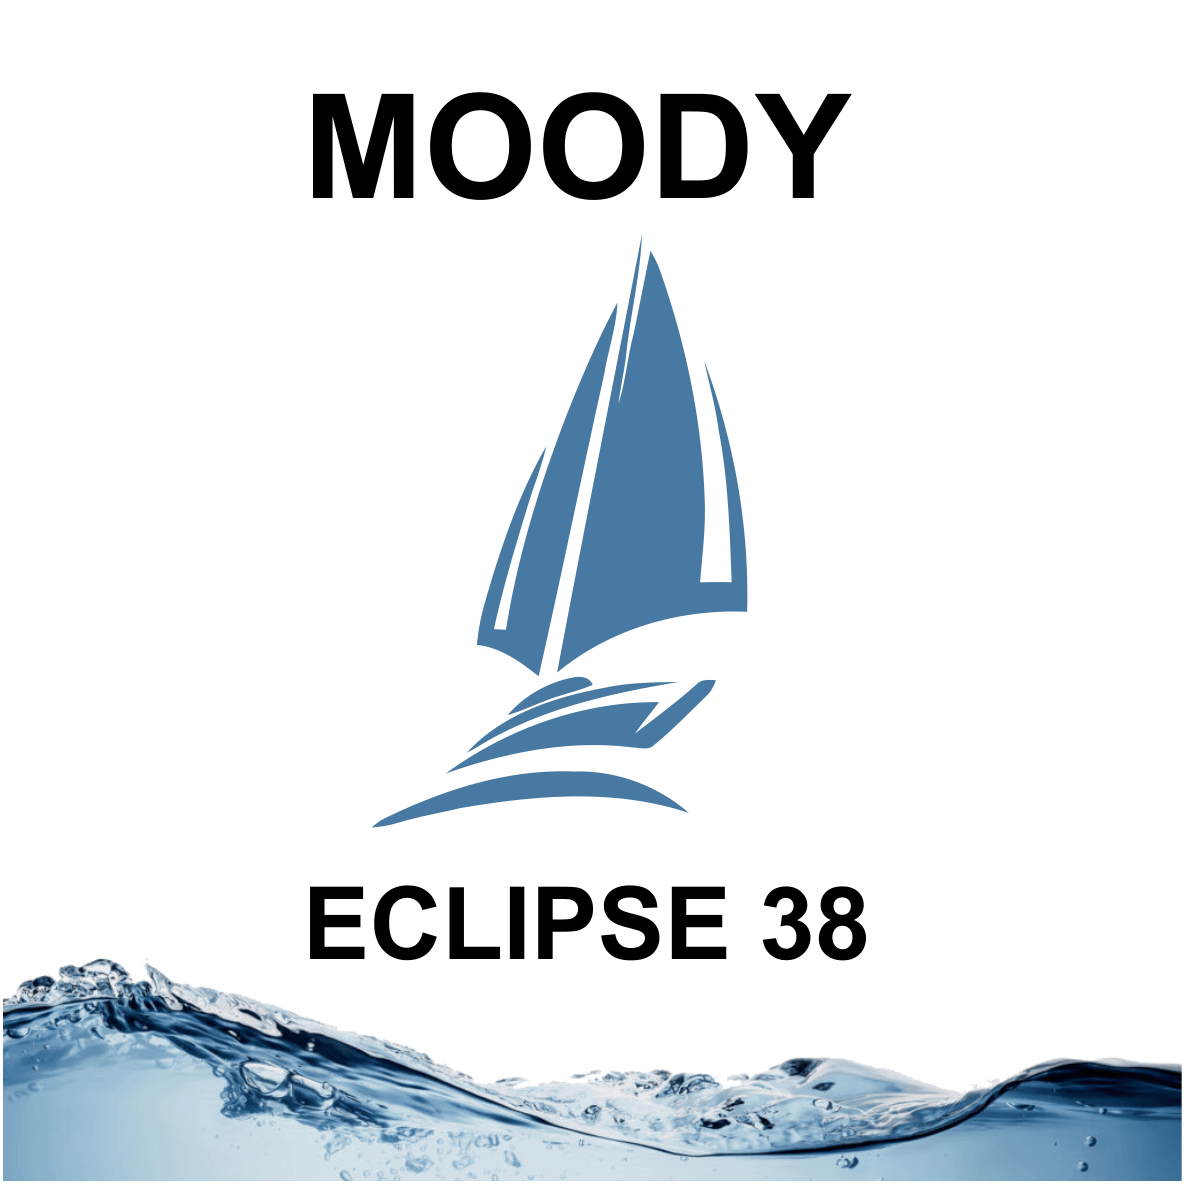 Moody Eclipse 38